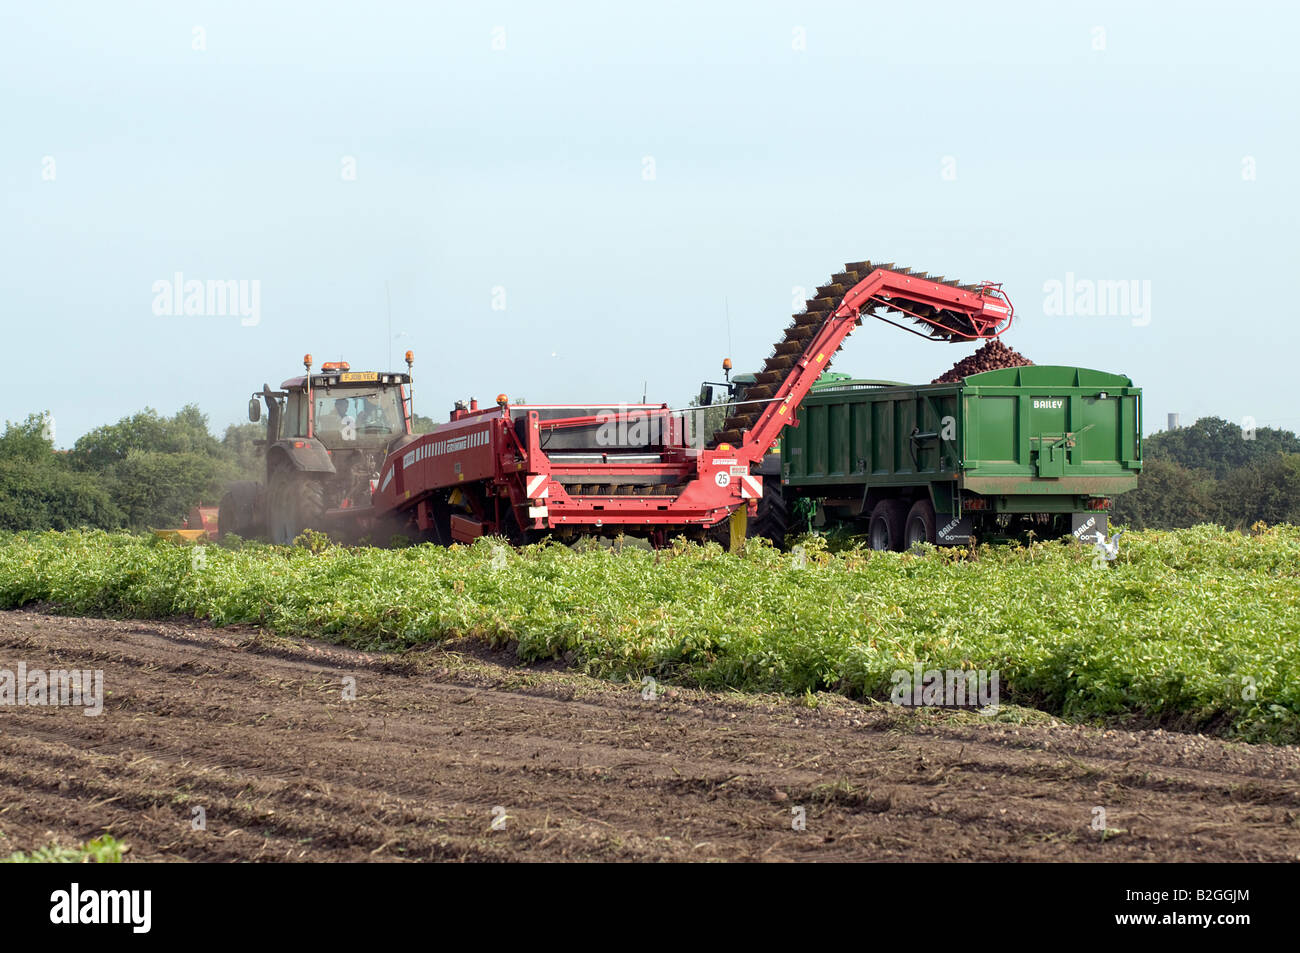 Harvesting a crop of potatoes Stock Photo